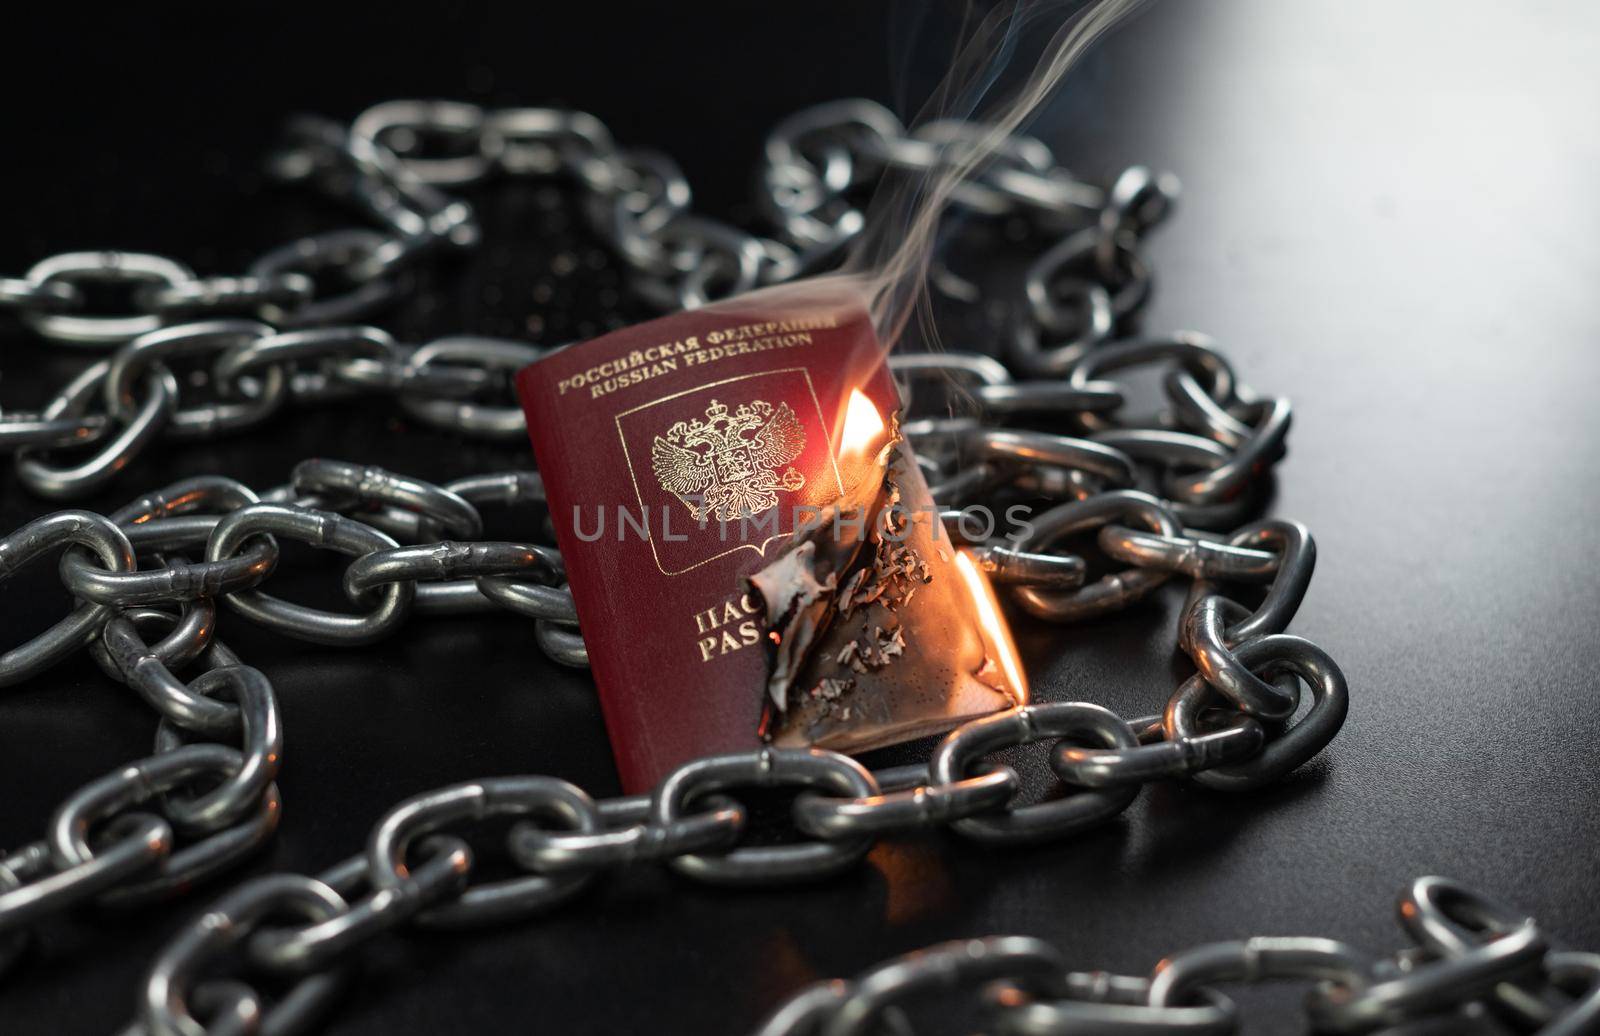 Russian passport is on fire against the background of a metal chain by Rotozey